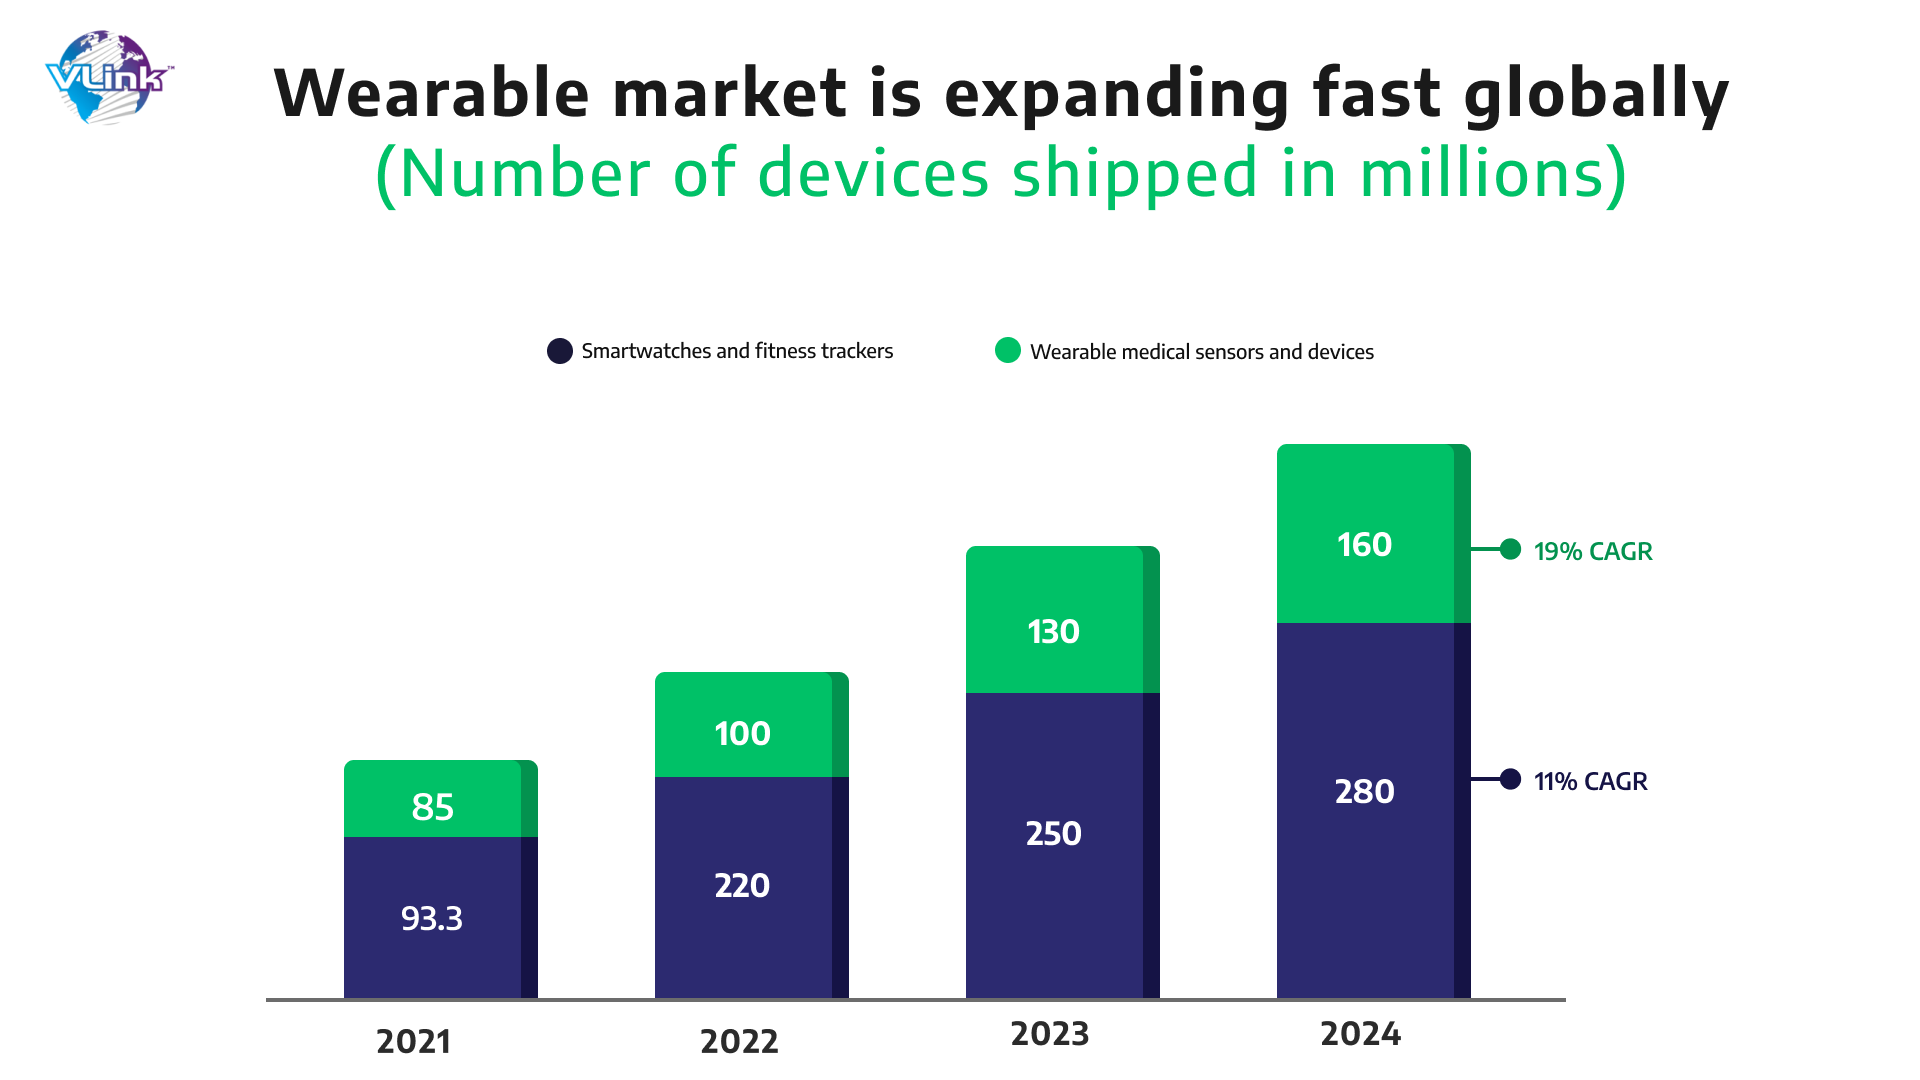 wearable market is expanding fast globally